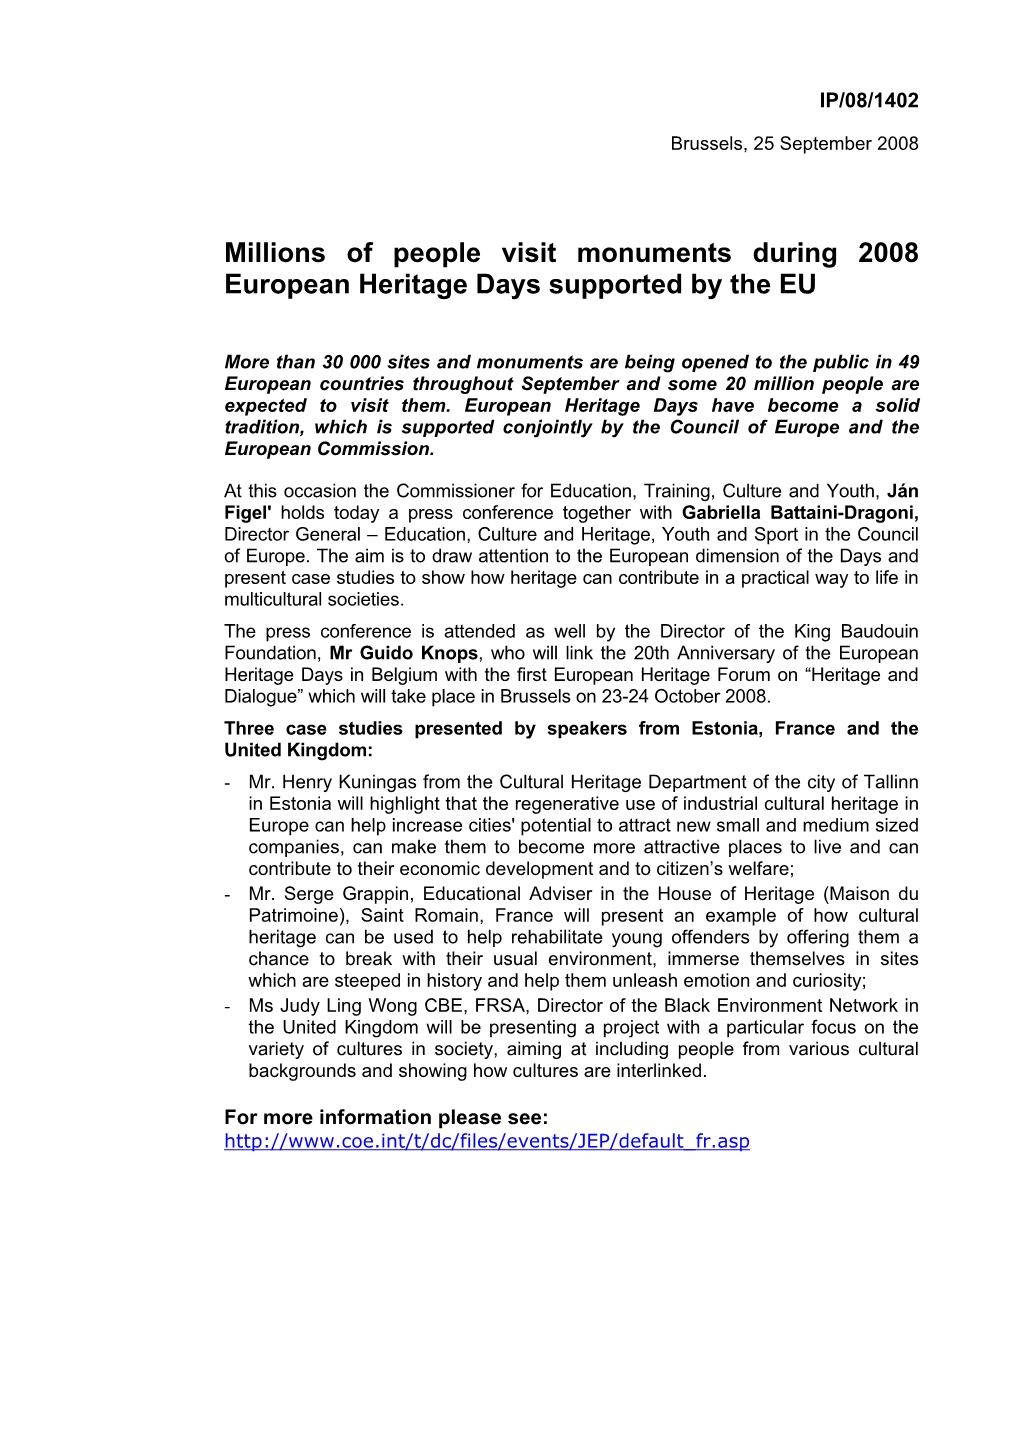 Millions of People Visit Monuments During 2008 European Heritage Days Supported by the EU